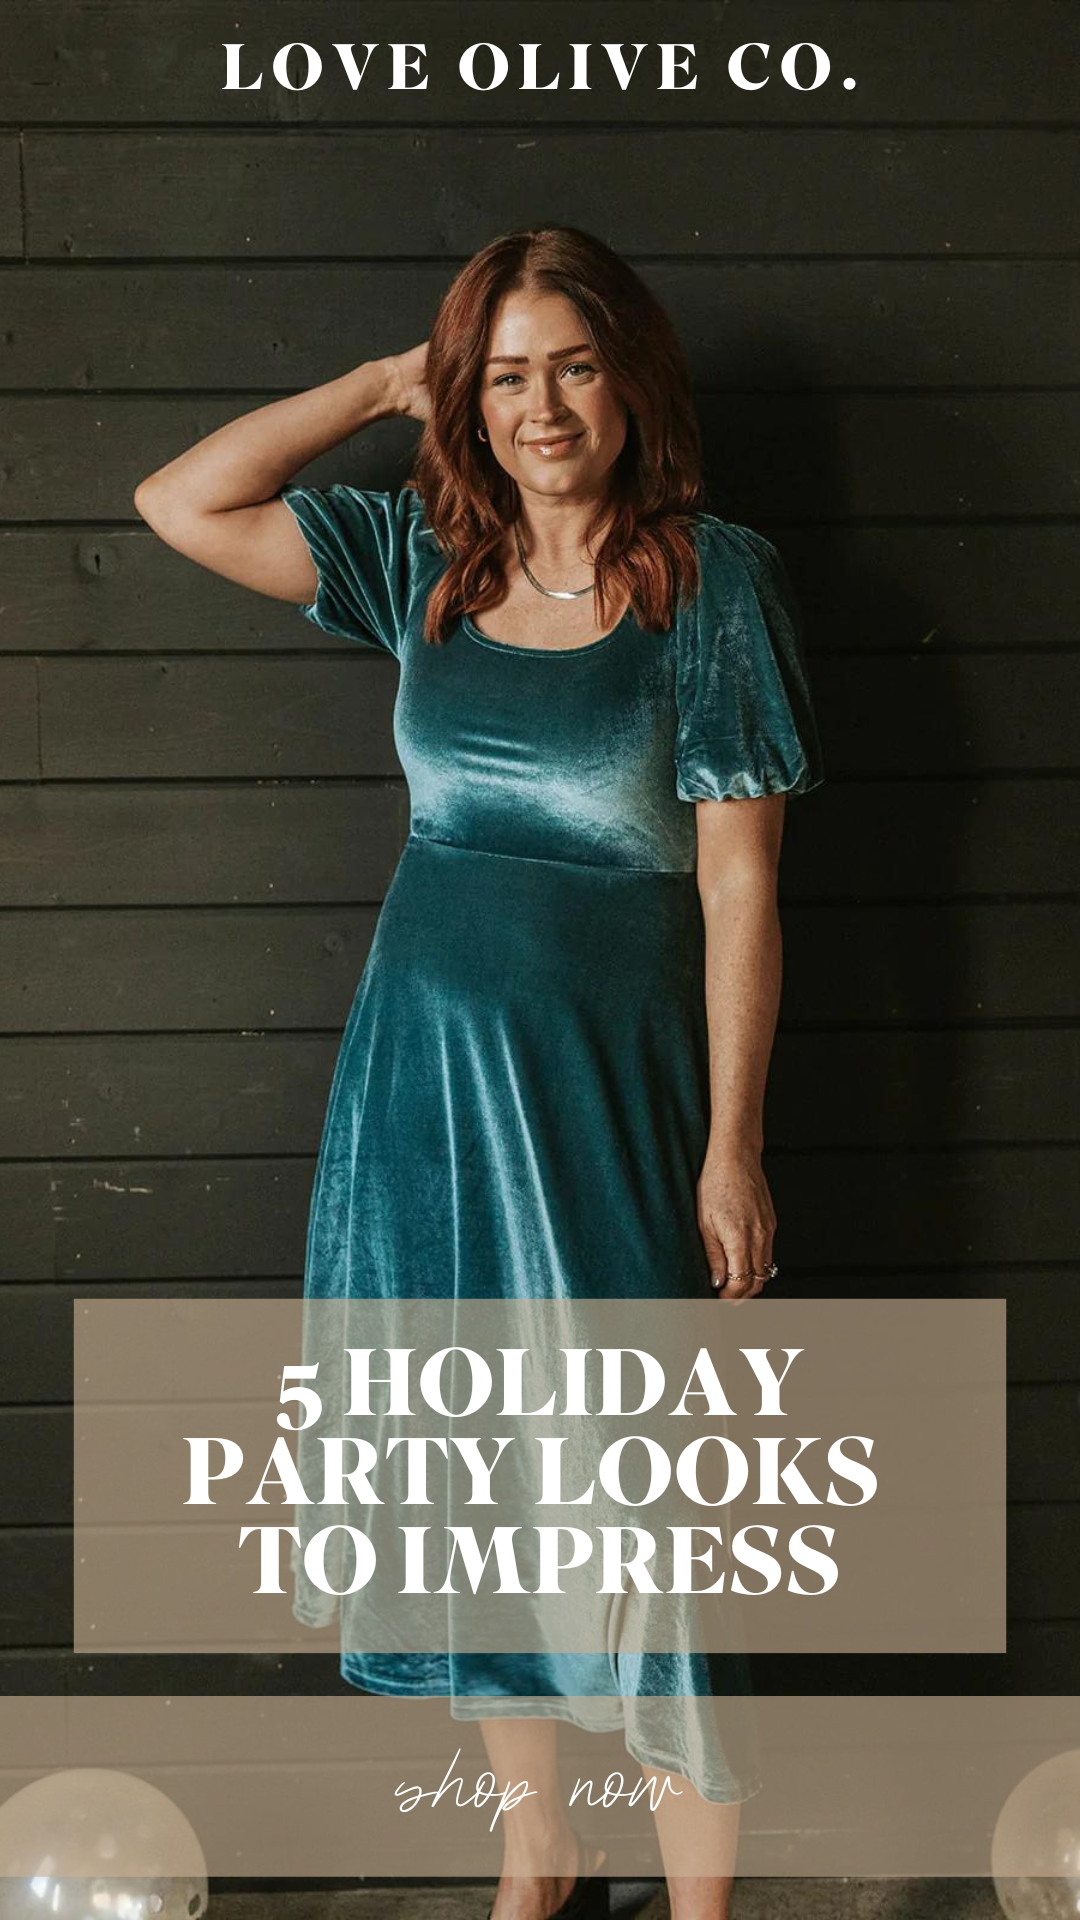 5 holiday party looks to impress. www.loveoliveco.com